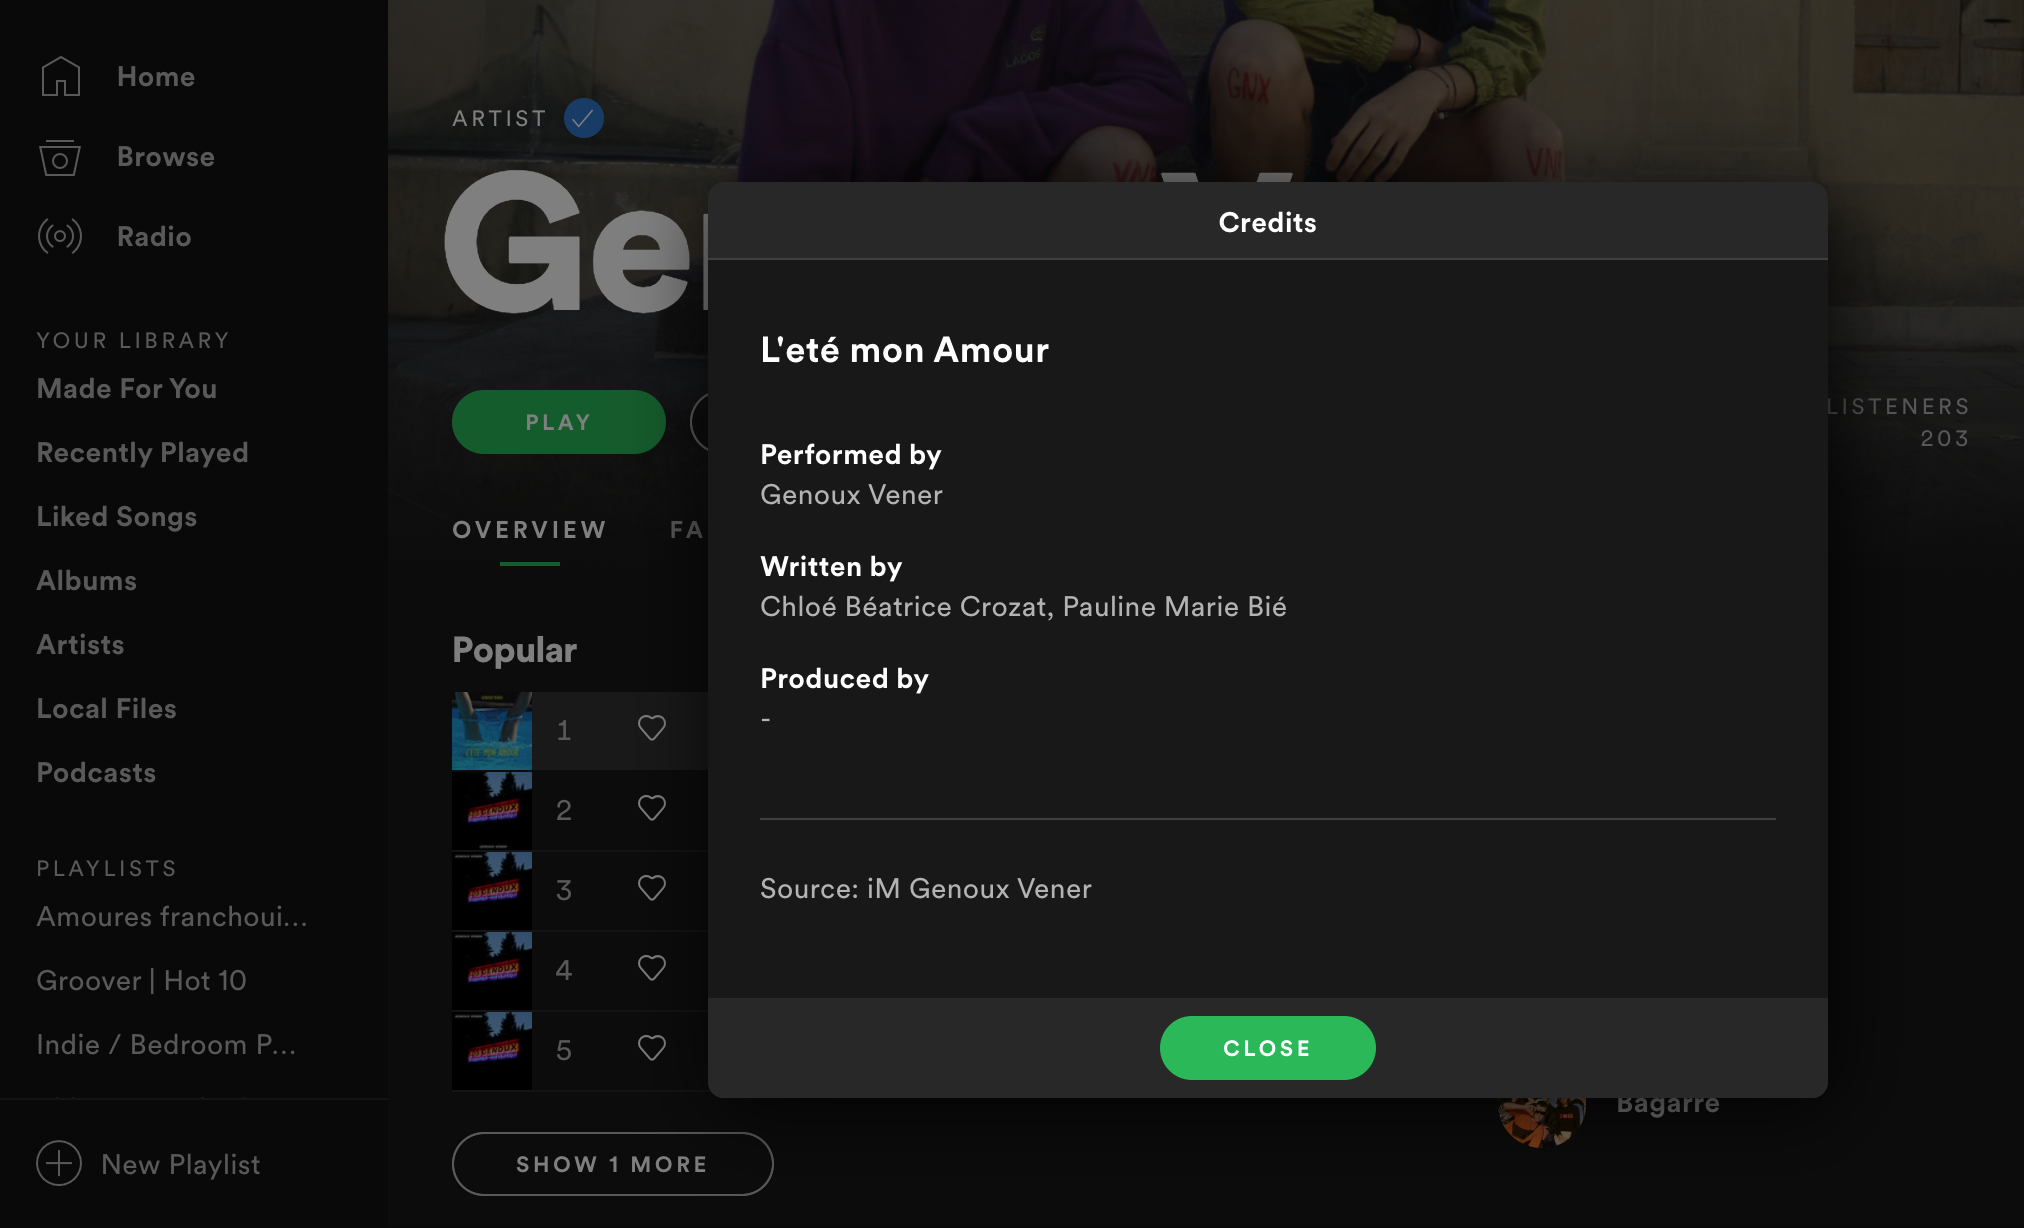 stats for spotify not accurate